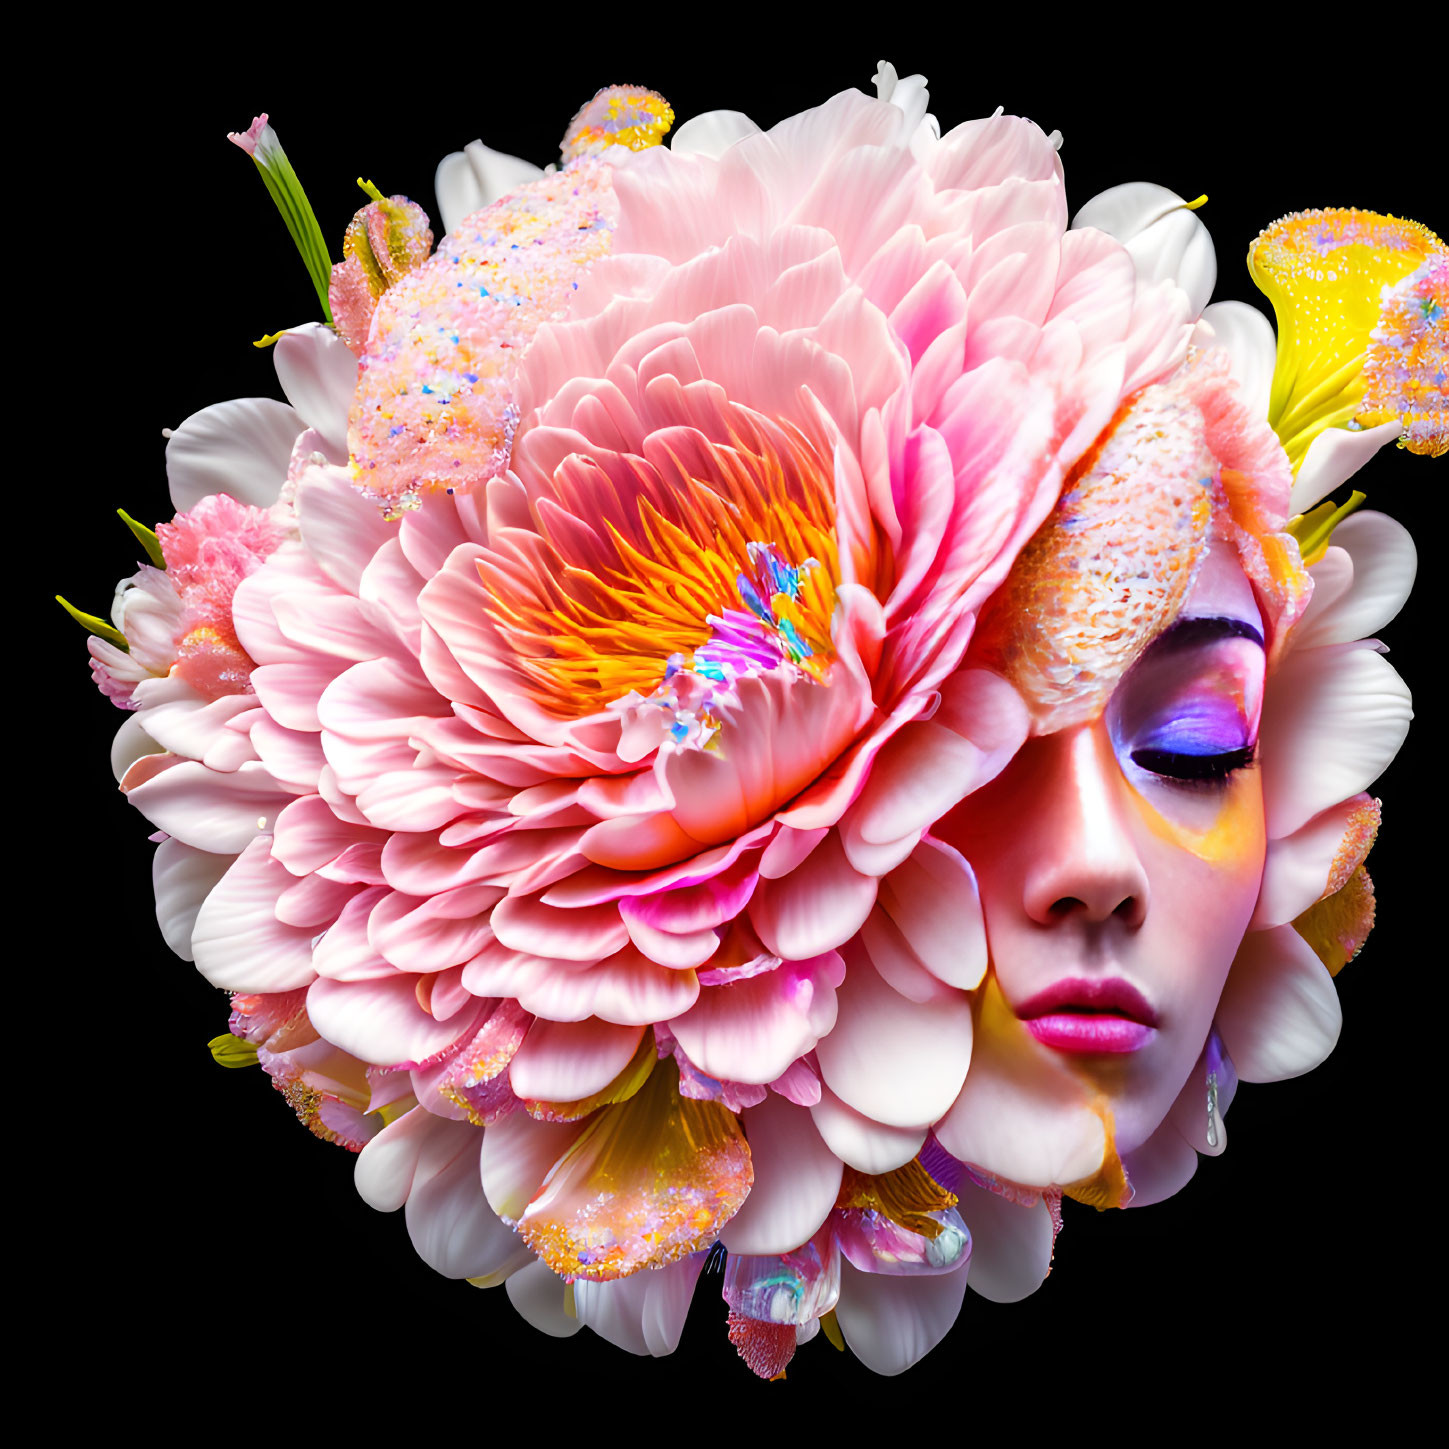 Woman's face merging with pink peony in colorful floral composition